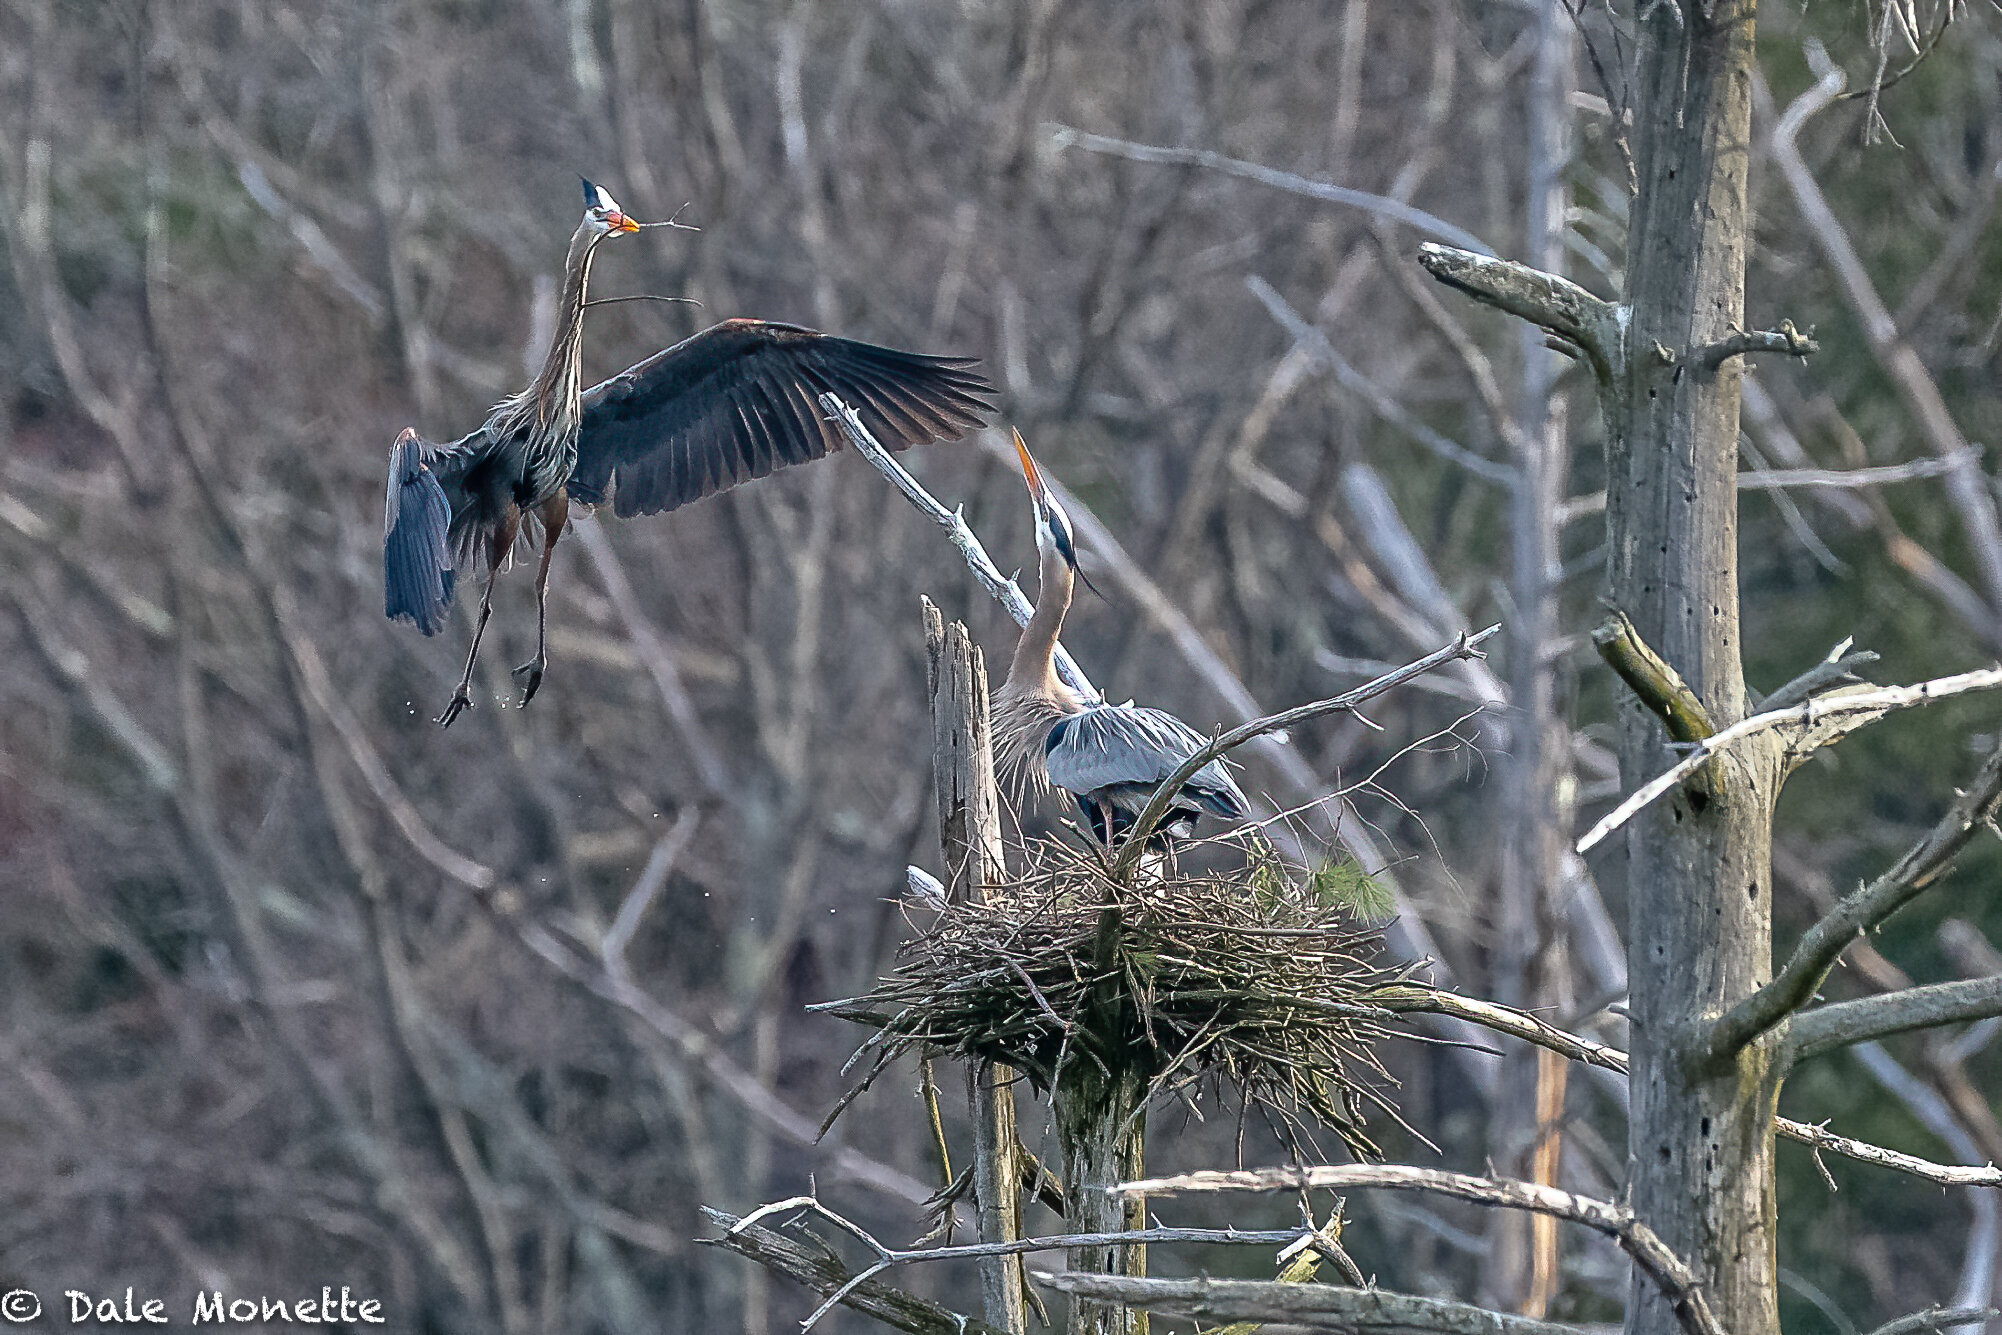   I’ve been watching great blue herons building their nests back up after a long windy winter. They are fun to watch as the males rip the twigs and sticks up from the shoreline and deliver it to the female who places it in the nest.  